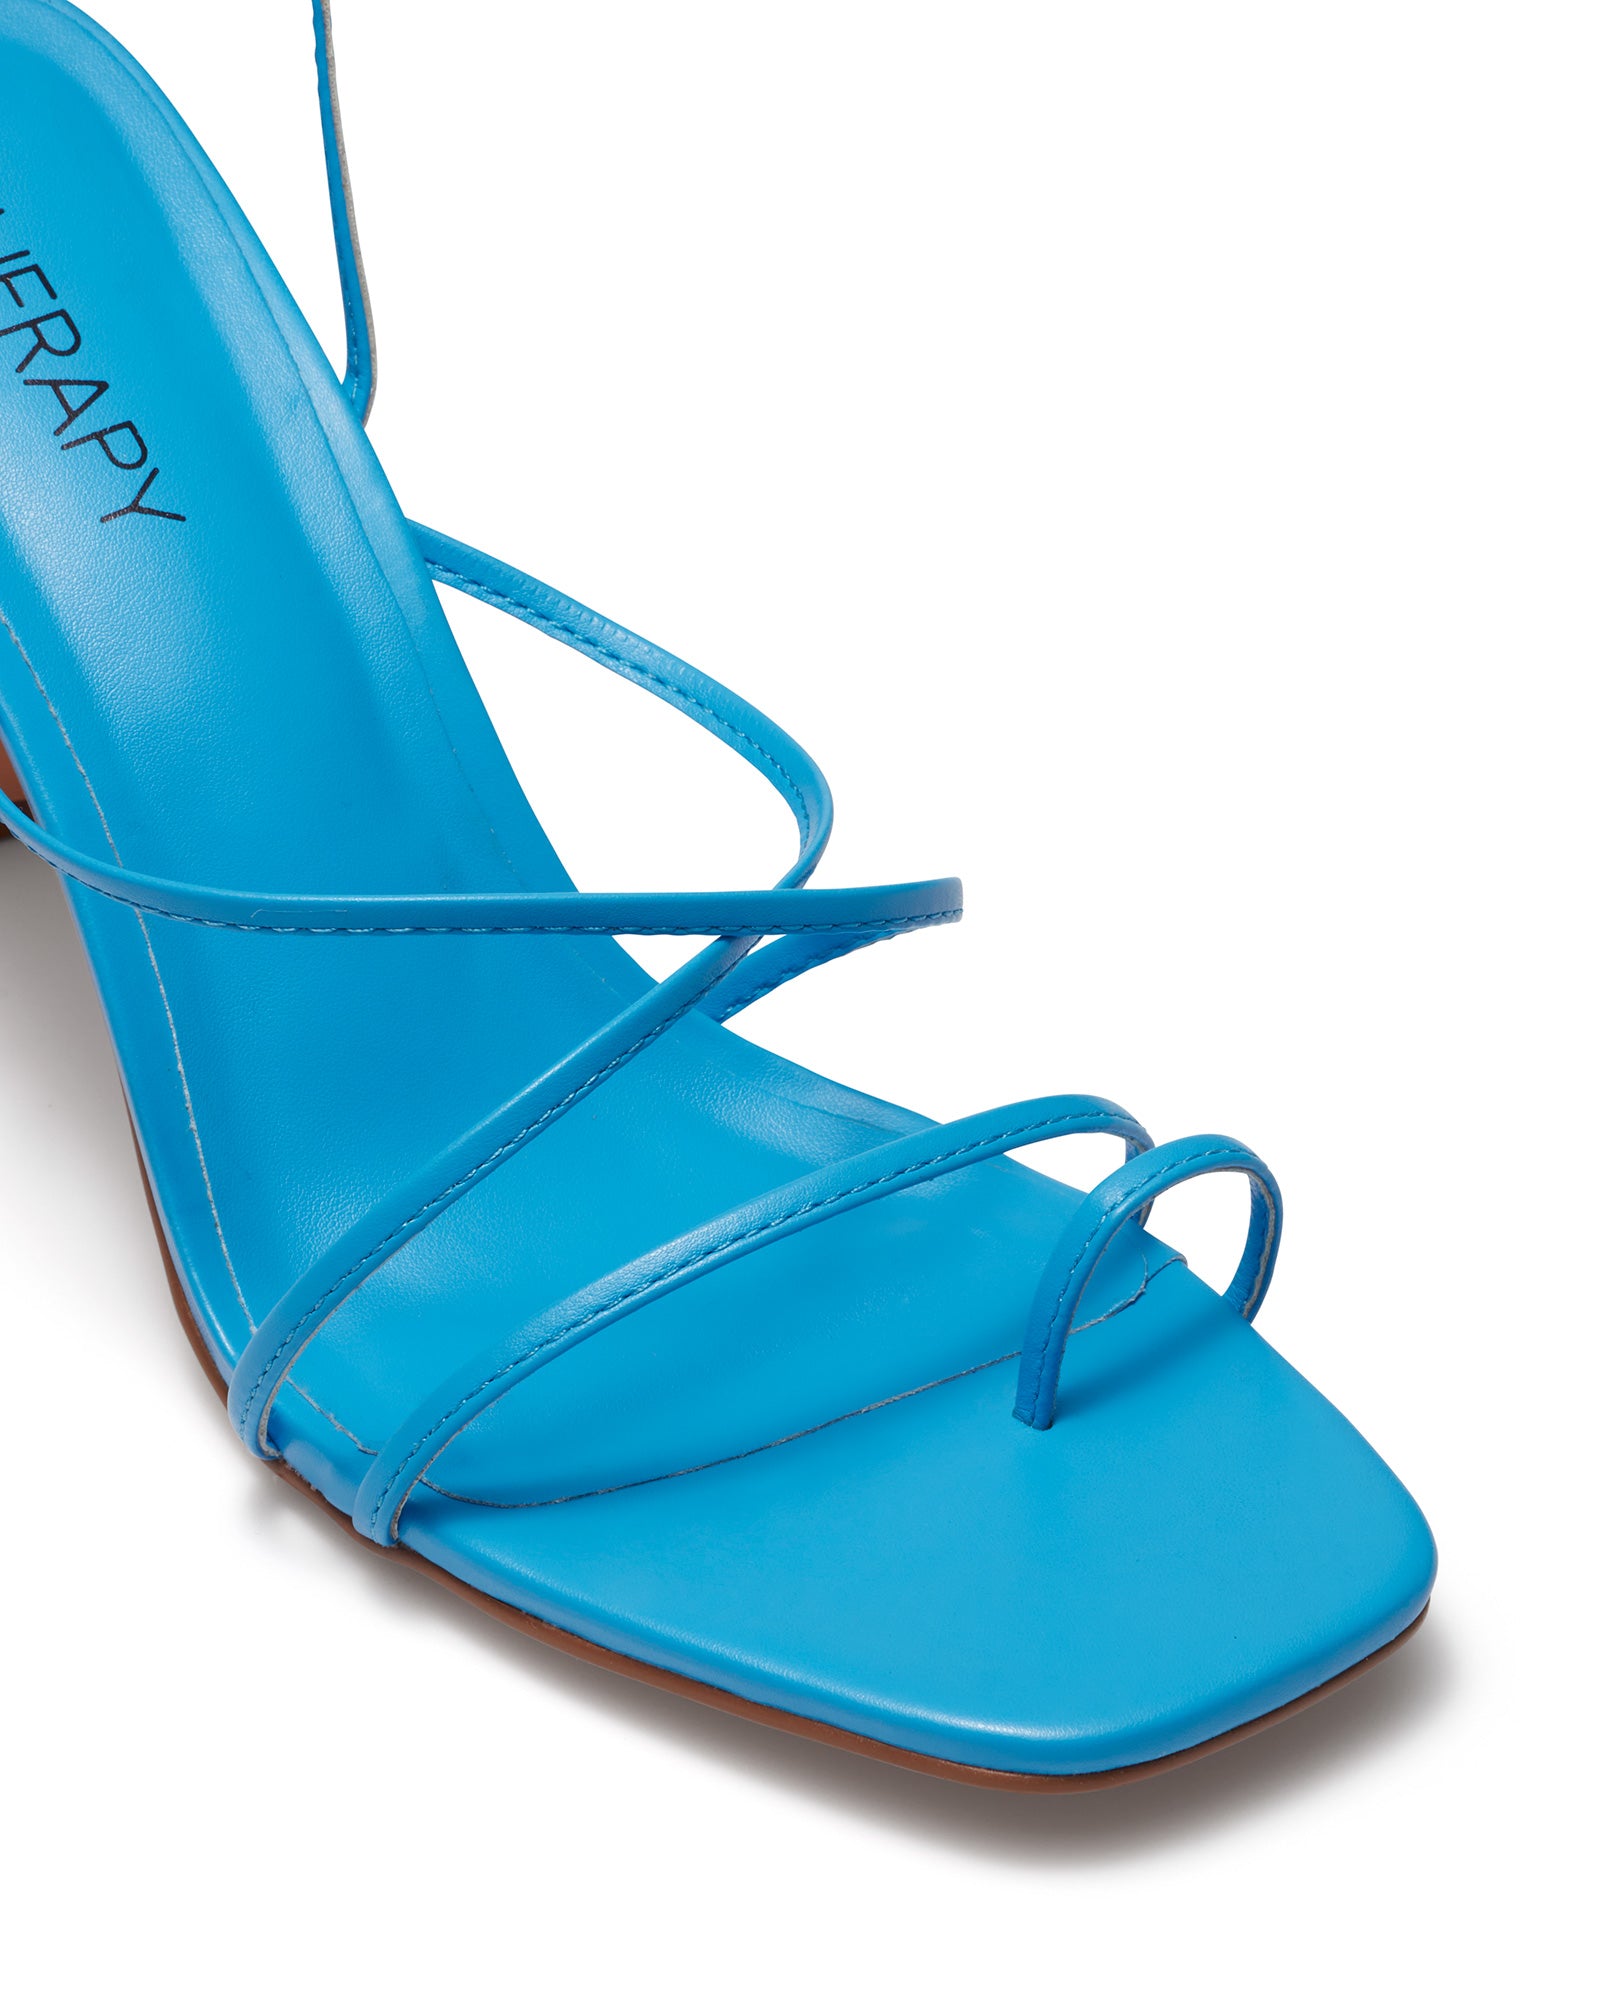 Therapy Shoes Bekka Azure | Women's Heels | Sandals | Tie Up | Strappy